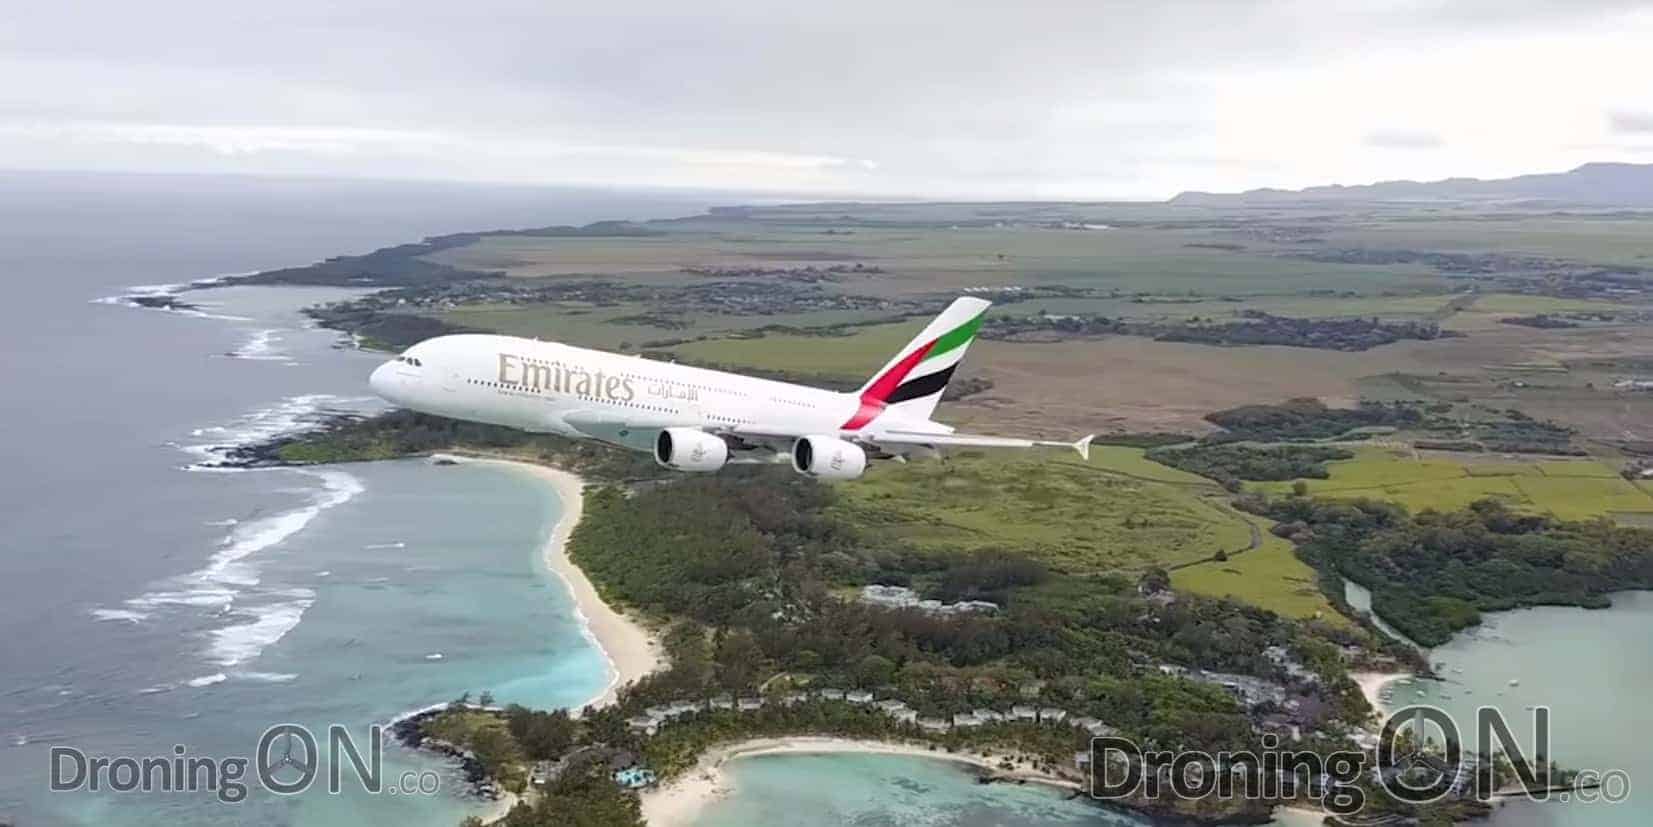 A drone has filmed an Emirates Airbus A380 taking off from an airport in the small Mauritius island.